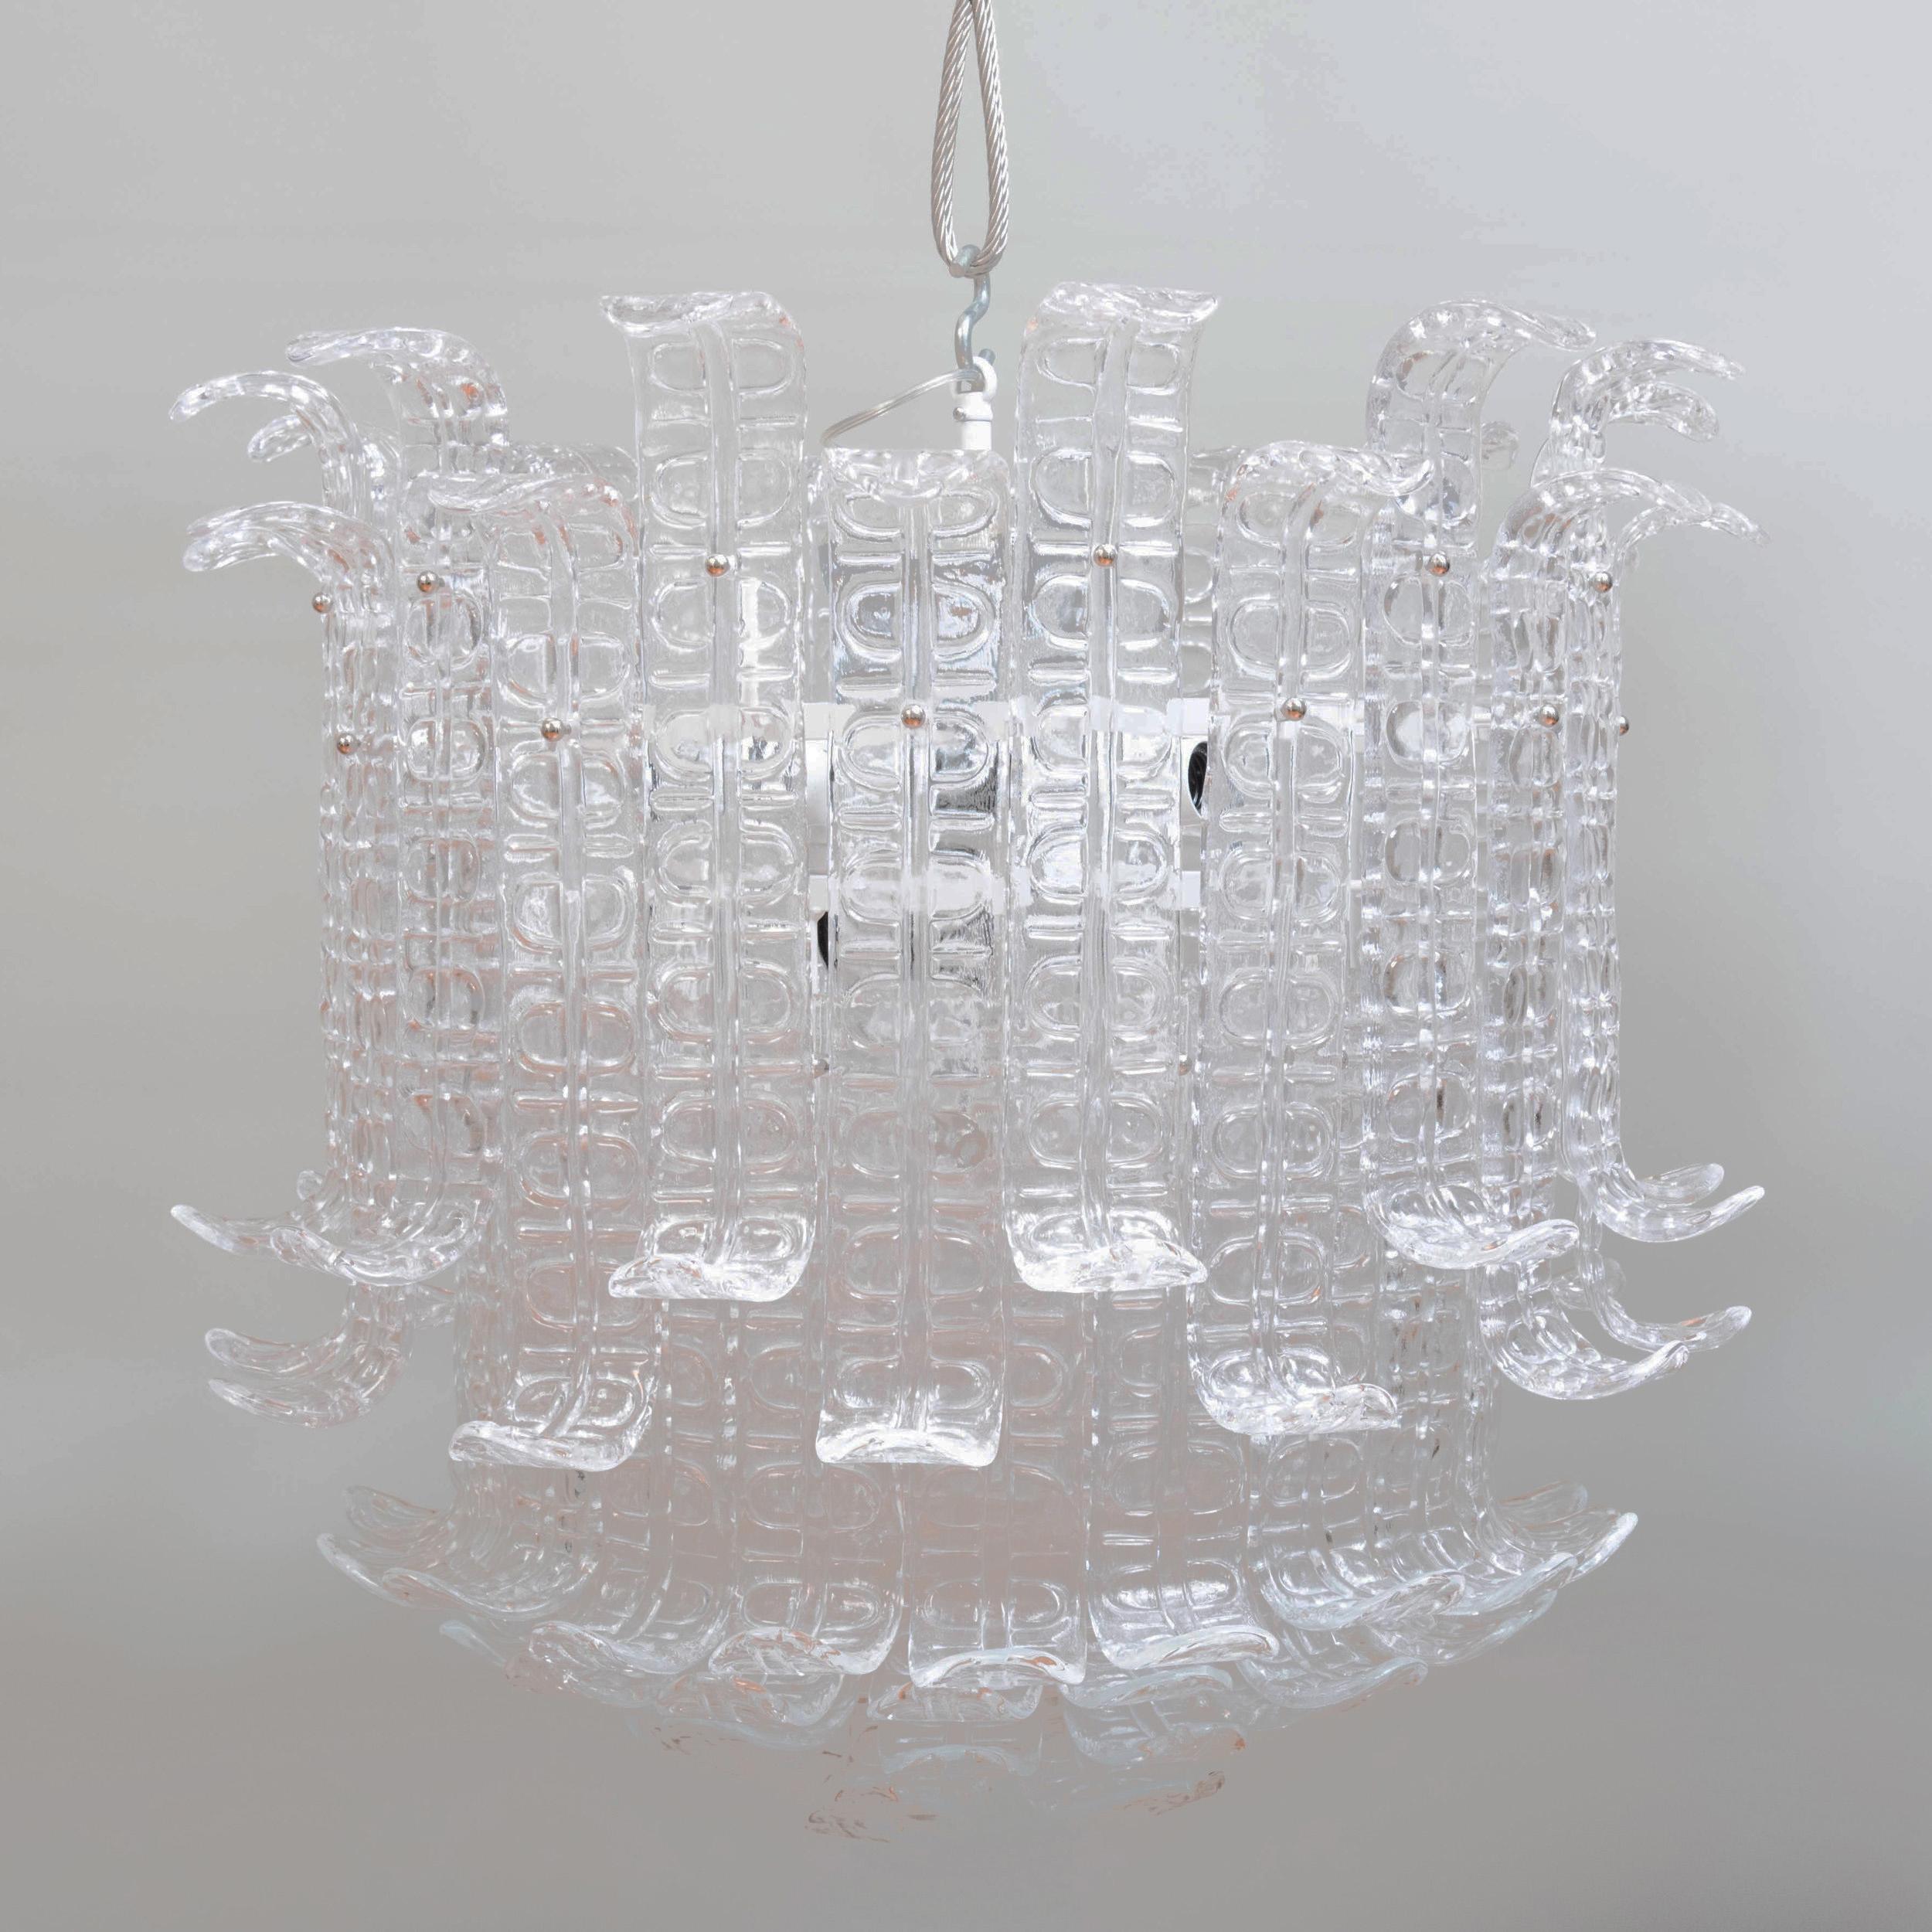 Art Deco clear Murano glass 'Ricci' chandelier.
Very bright light, 9 bulbs, in good condition.
Measures: Height 28